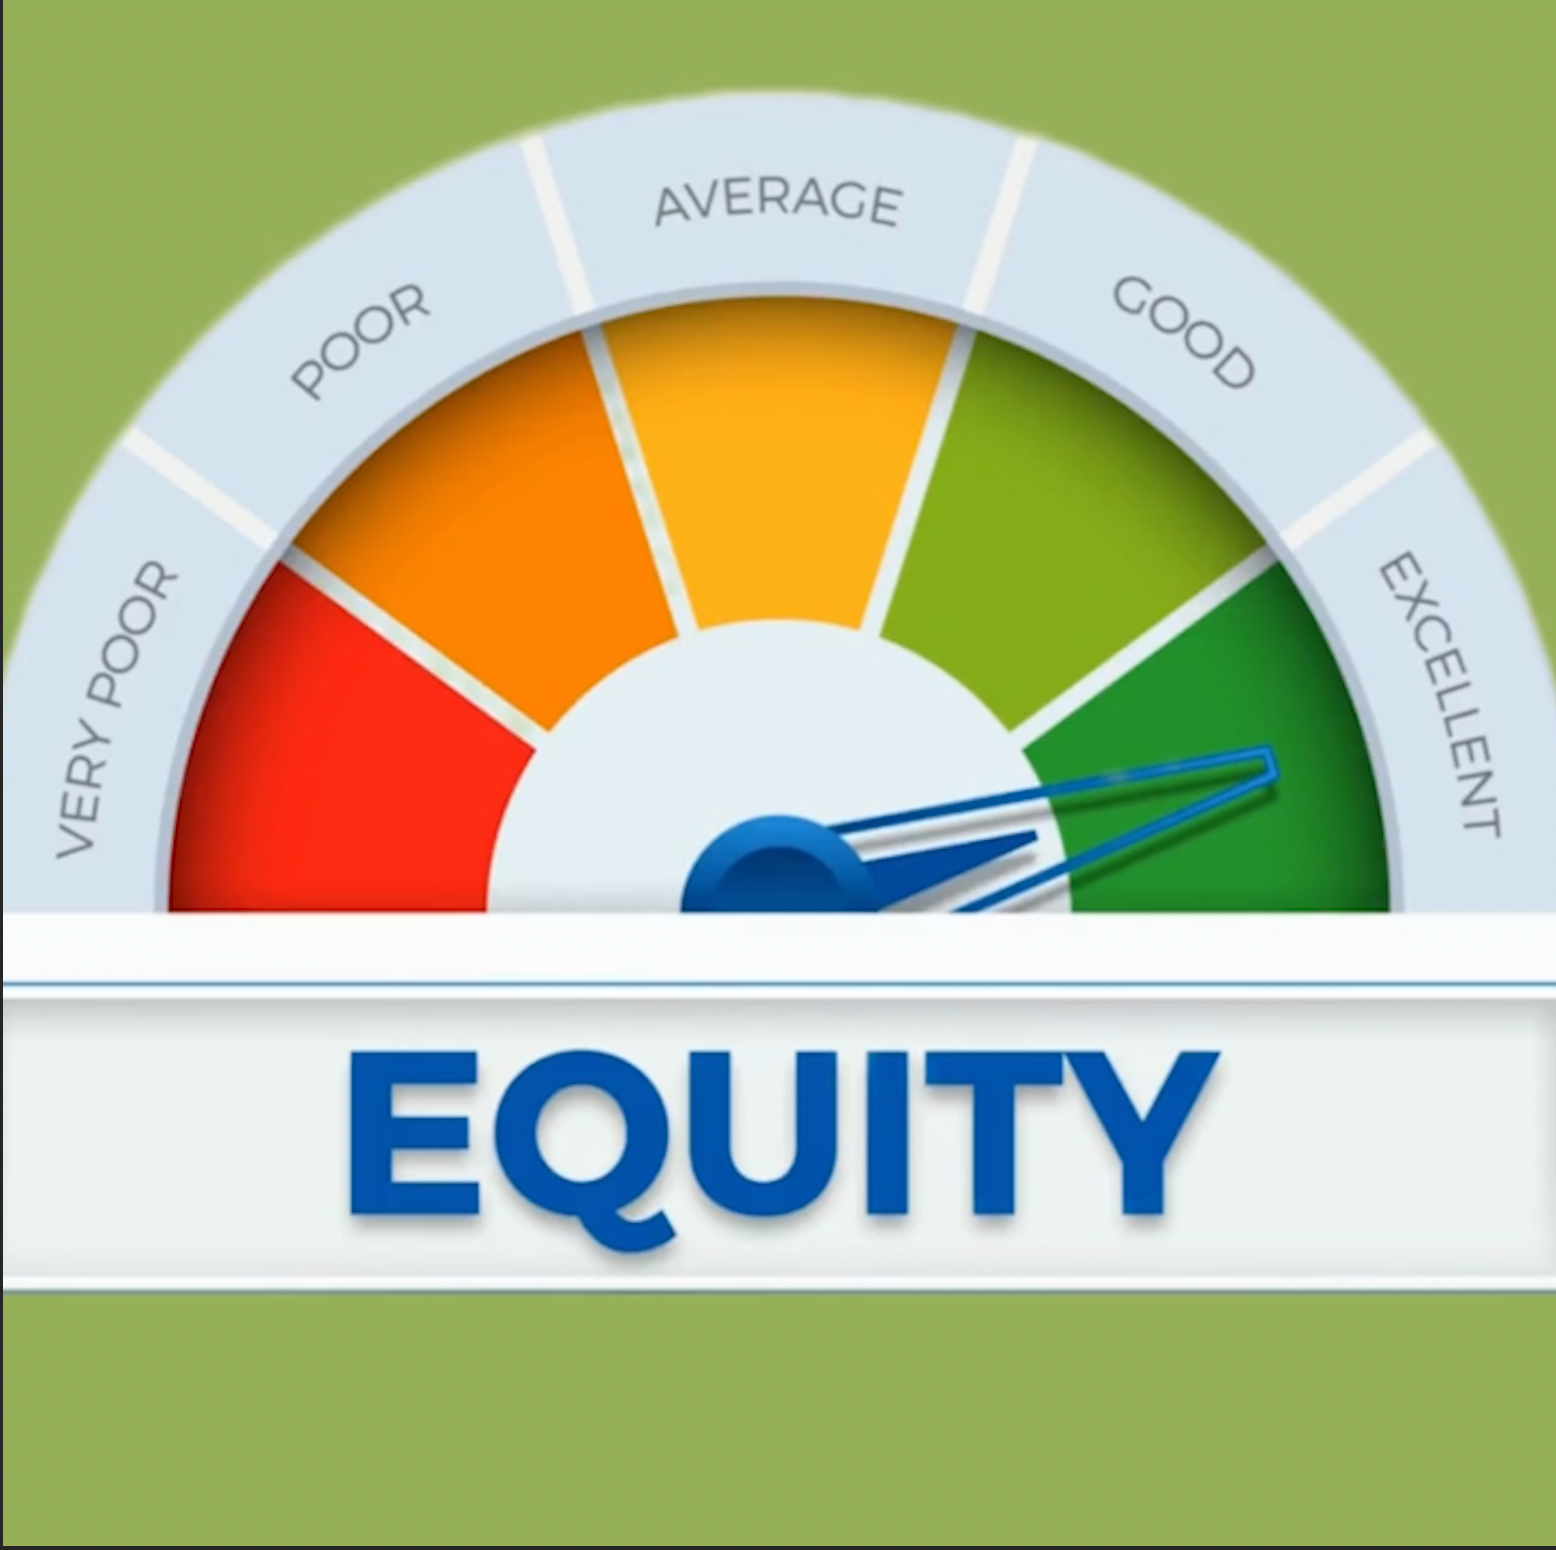 a meter  of equity on a green background with measurement markings that read: very poor in red, poor in orange, average in yellow, good in light green, and excellent in dark green. The needle on the meter sets on excellent.